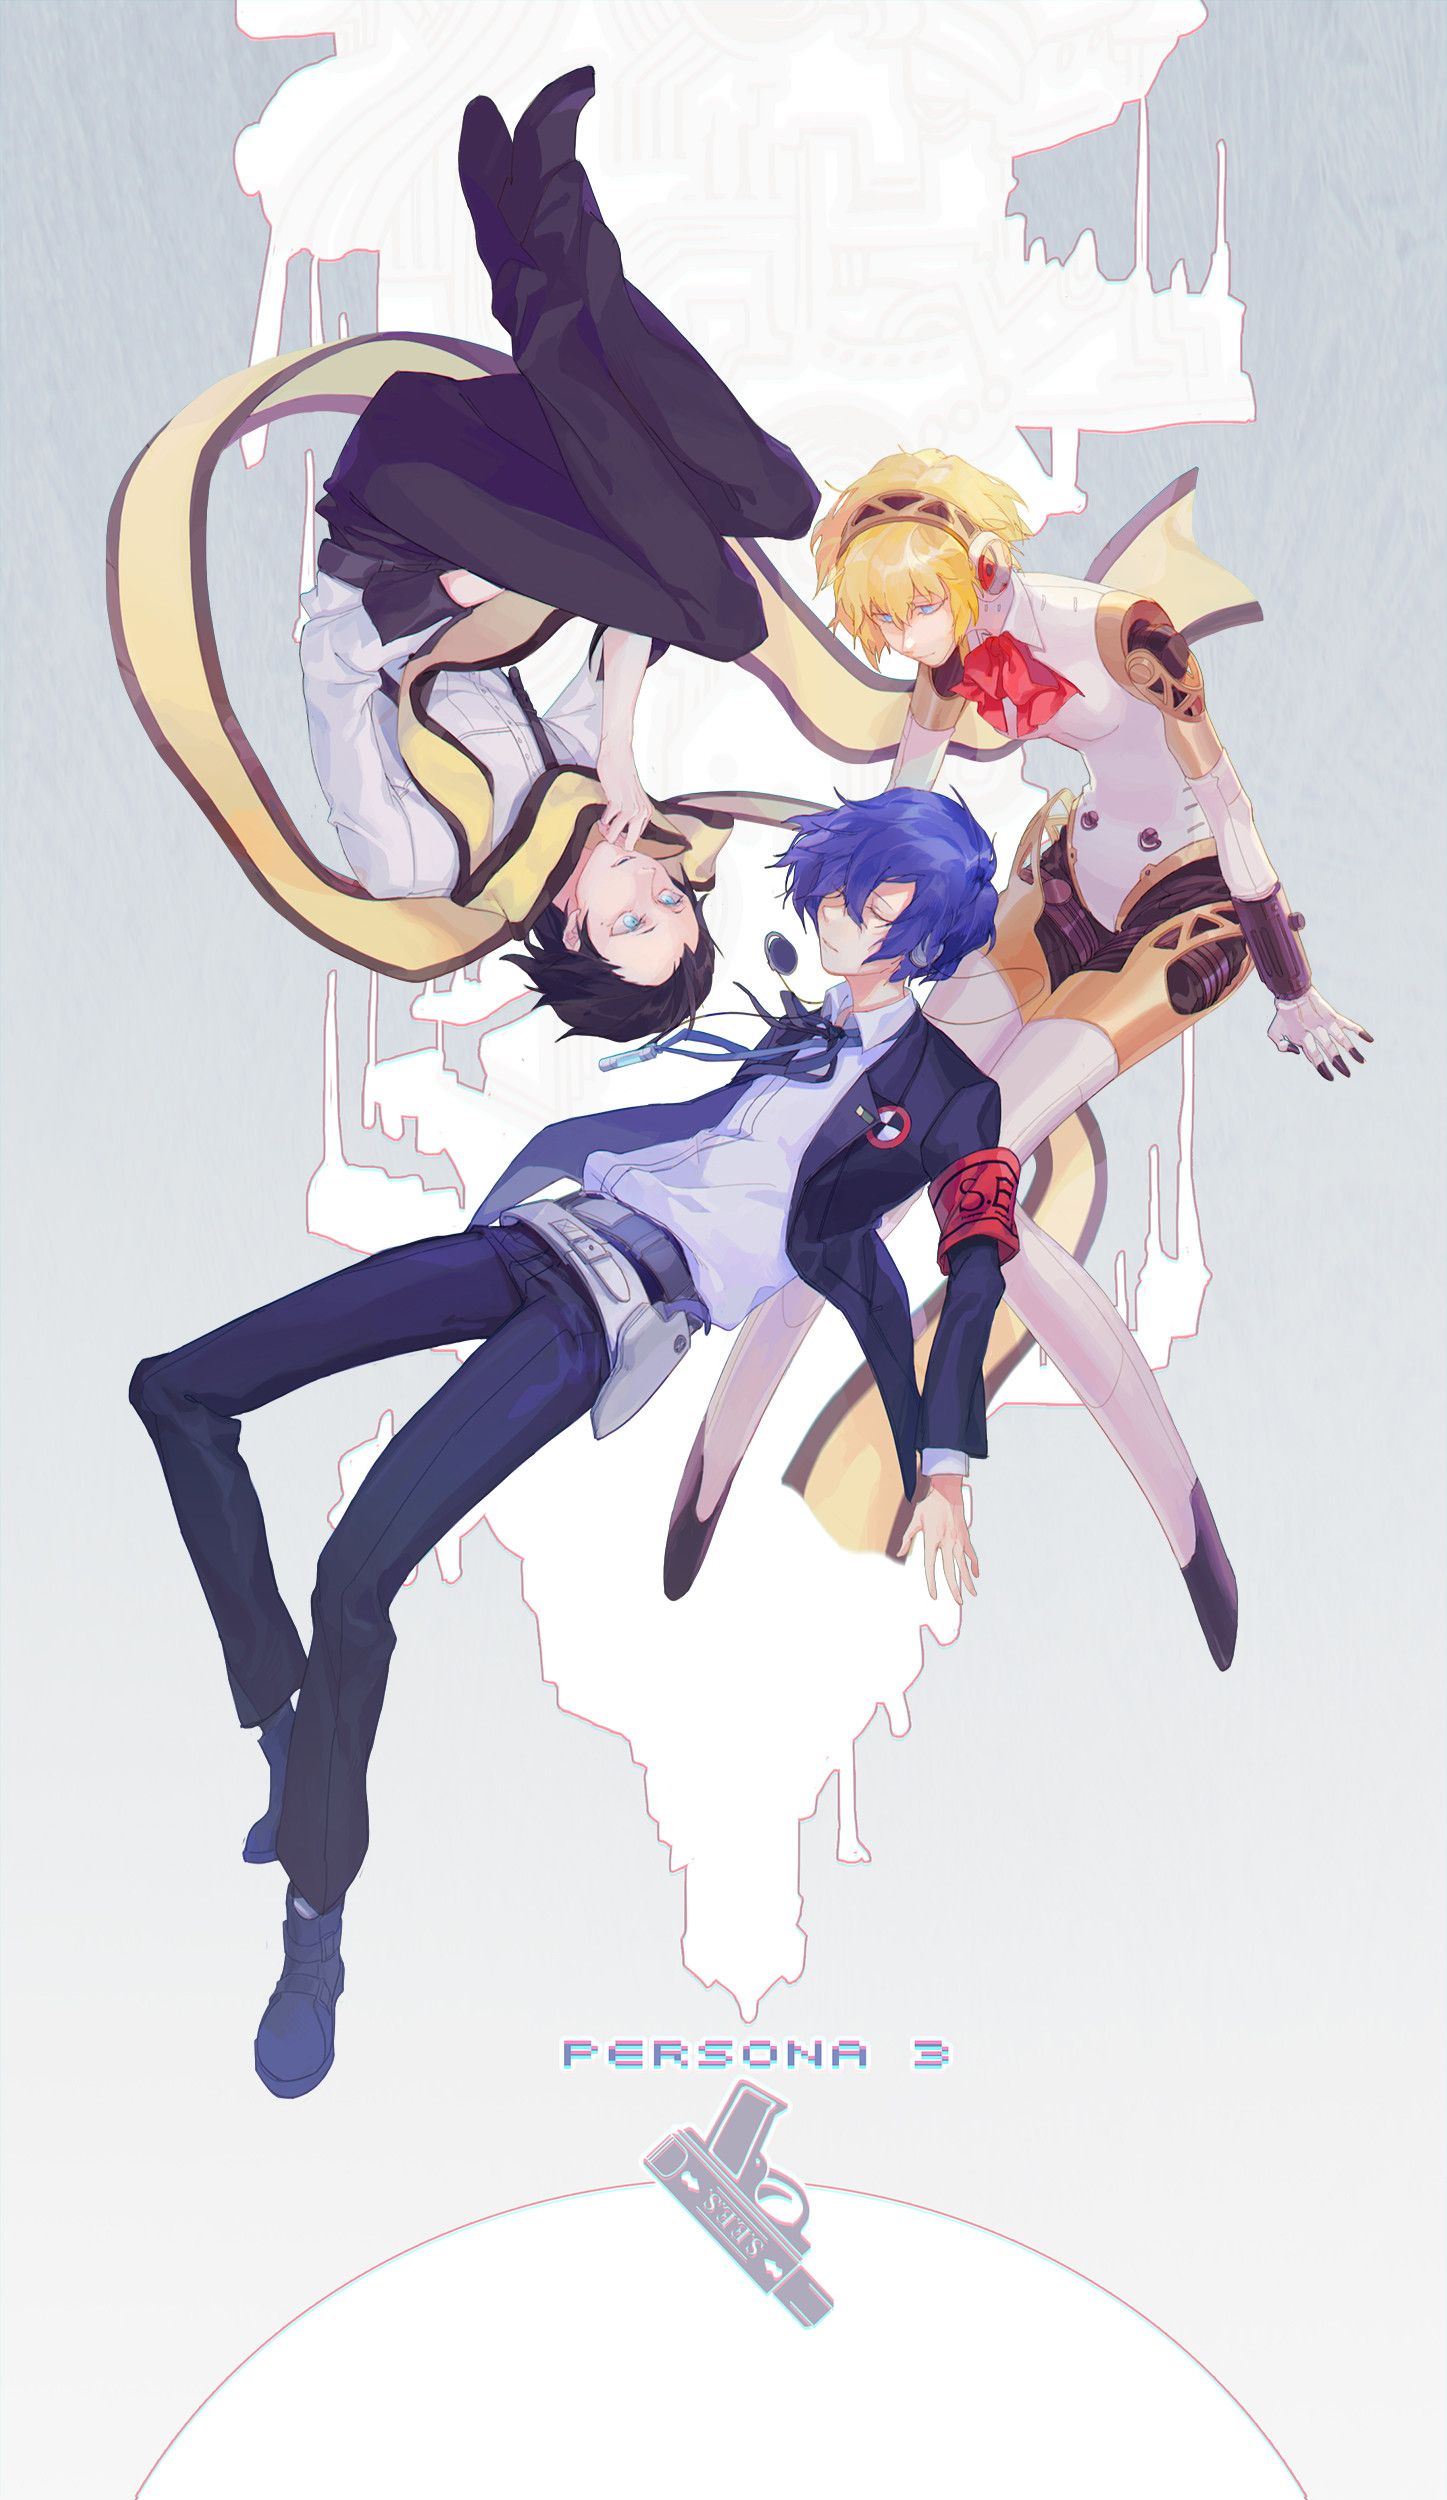 Persona 3 wallpaper by Reaperwh  Download on ZEDGE  cf30